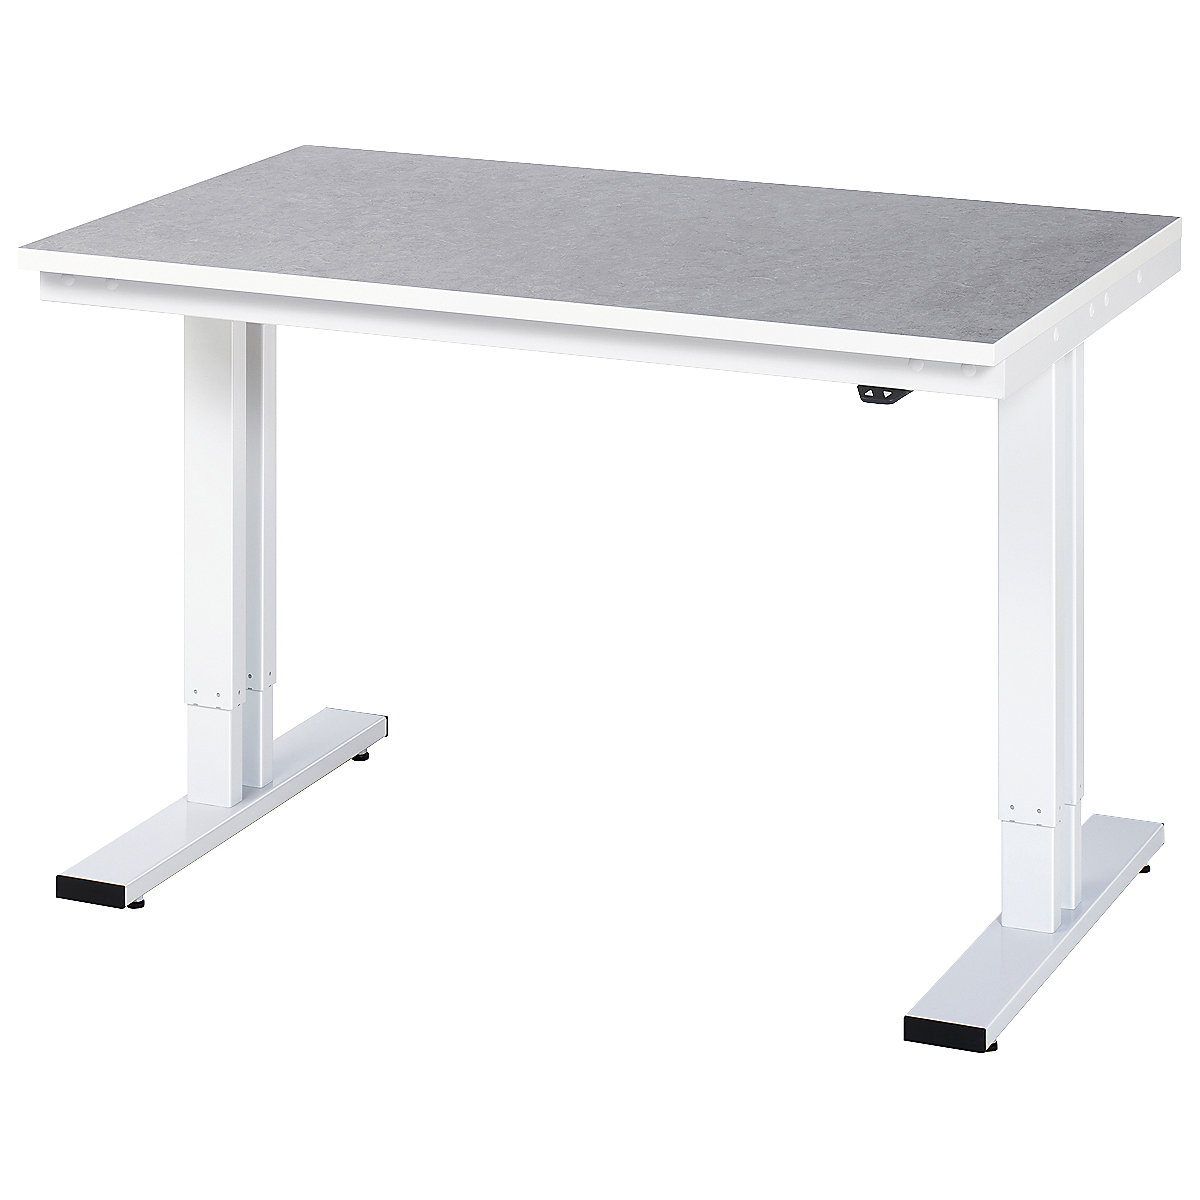 Work table, electric height adjustment – RAU, linoleum cover, max. load 300 kg, WxD 1250 x 800 mm-8